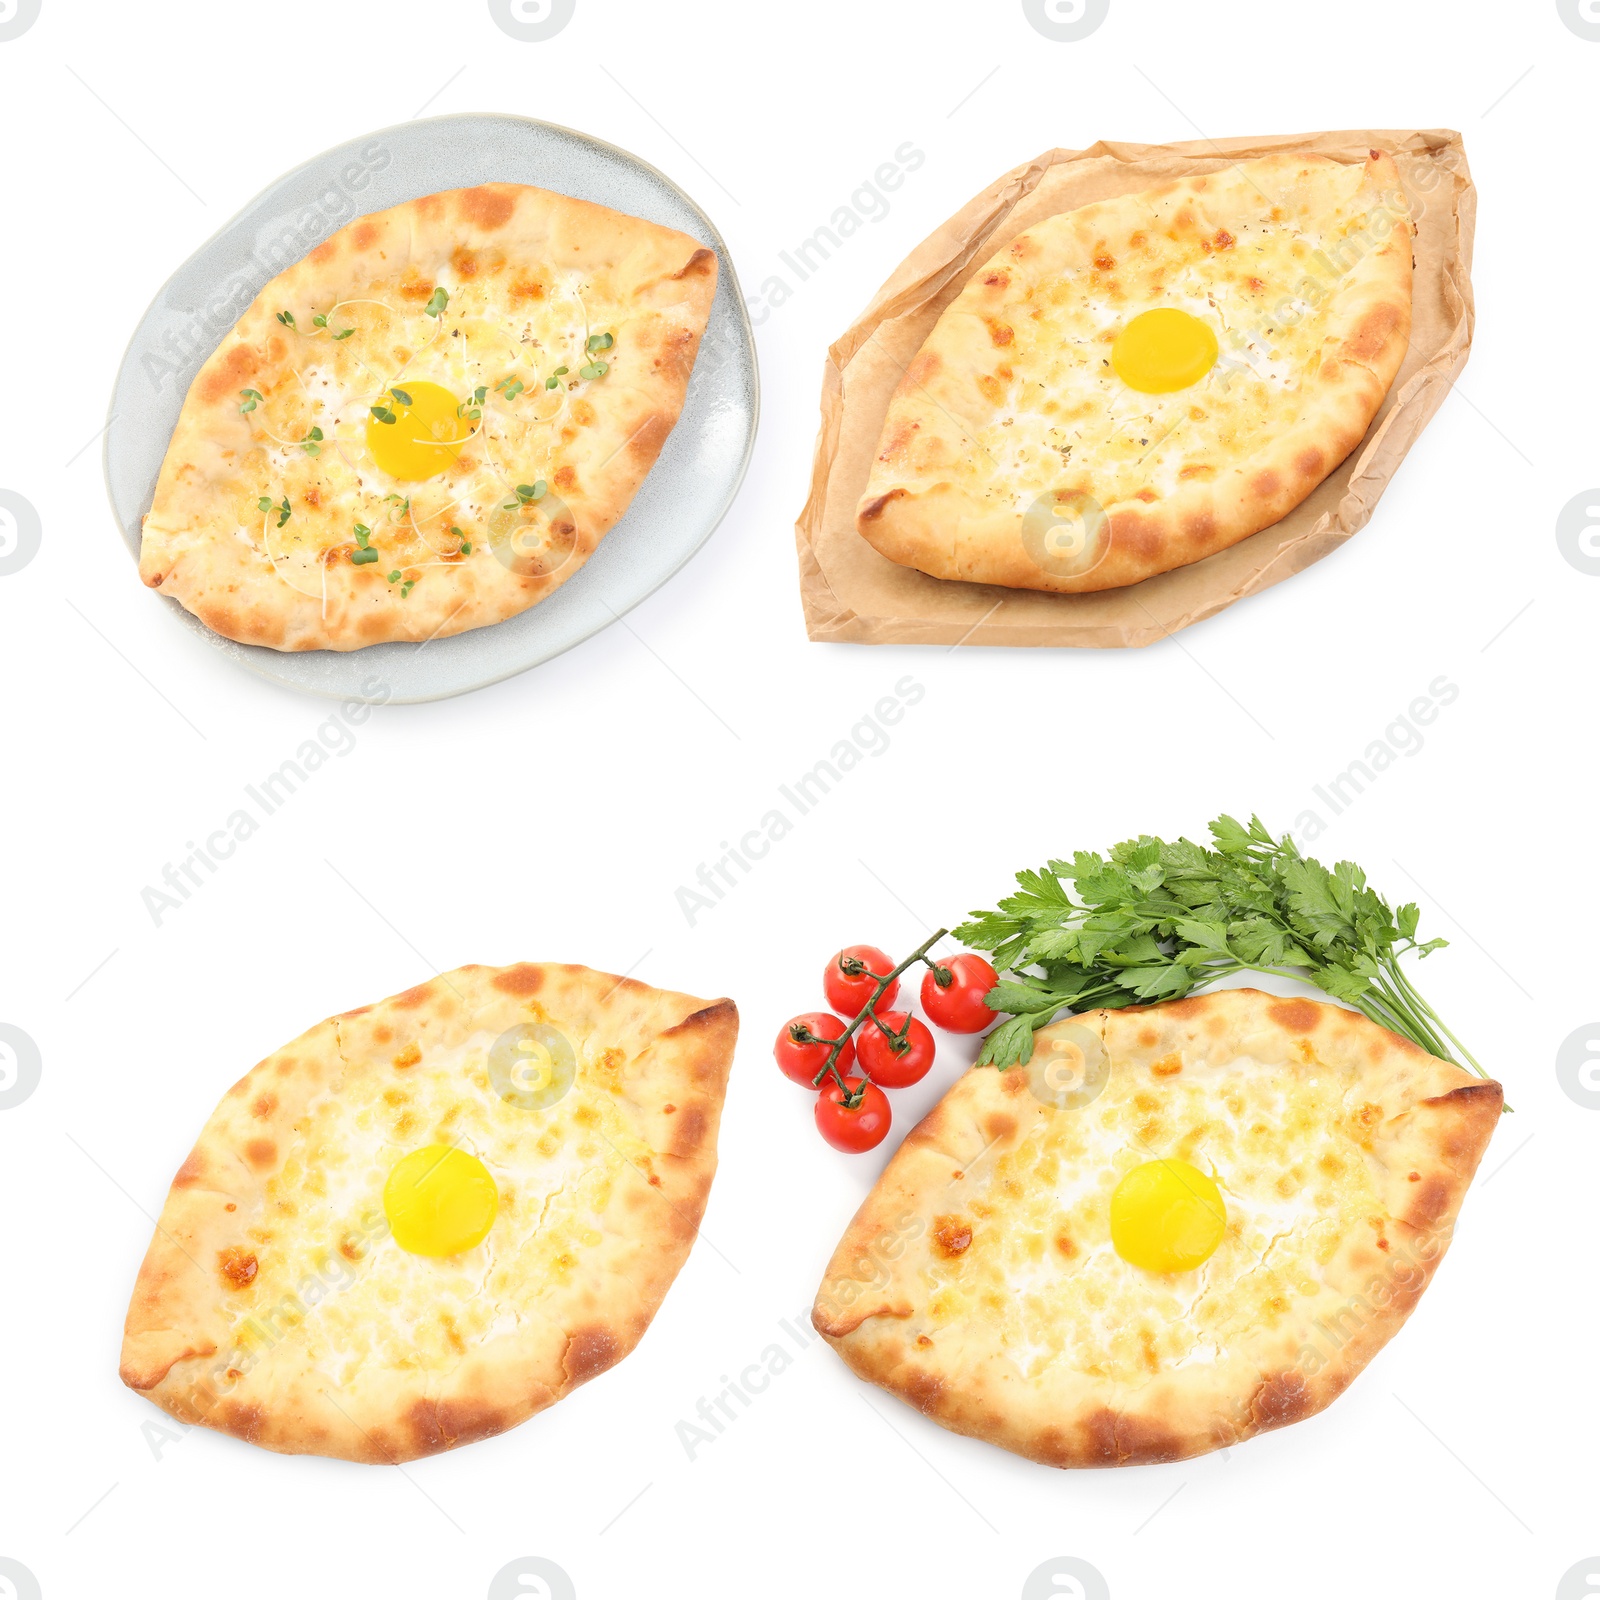 Image of Collage with tasty Adjarian khachapuris on white background